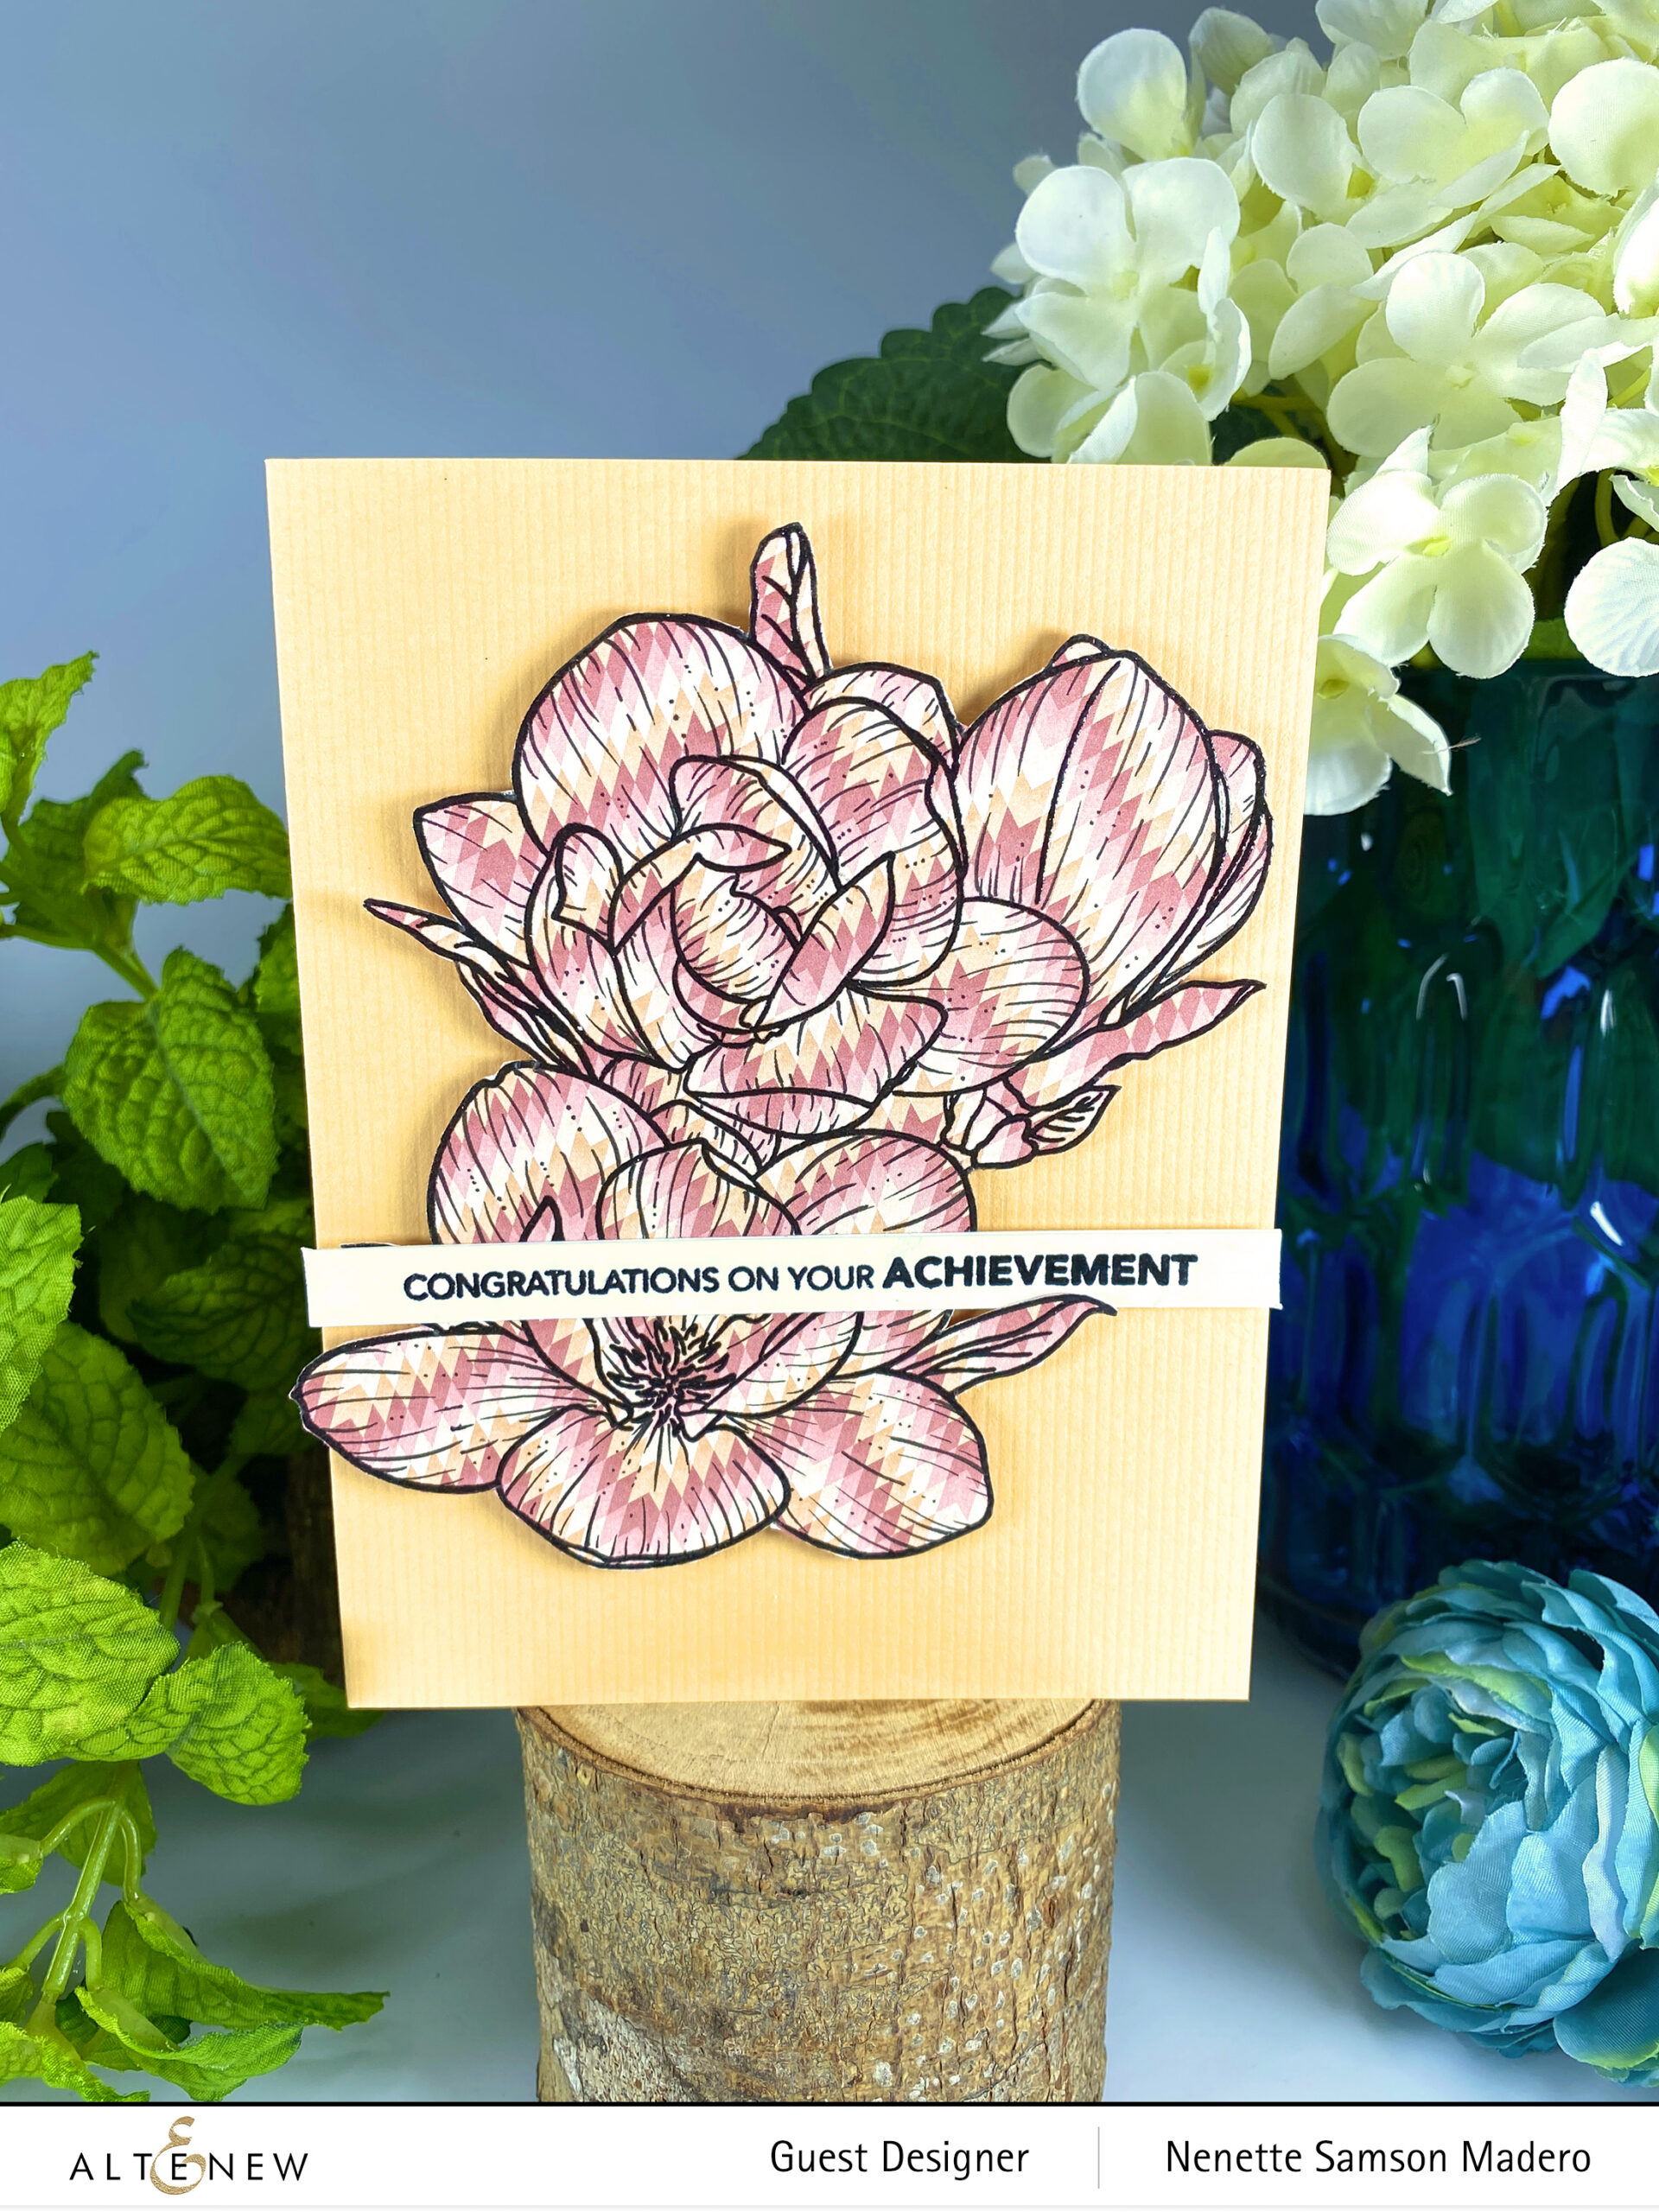 http://mylittleattic.com/wp-content/uploads/2022/04/Altenew-PAF-Magnolia-Rustica-Rubra-stamp-All-About-A-stamp-Obsidian-Ink-Fine-LIner-Pens-WildFlower-Paper-scaled.jpg